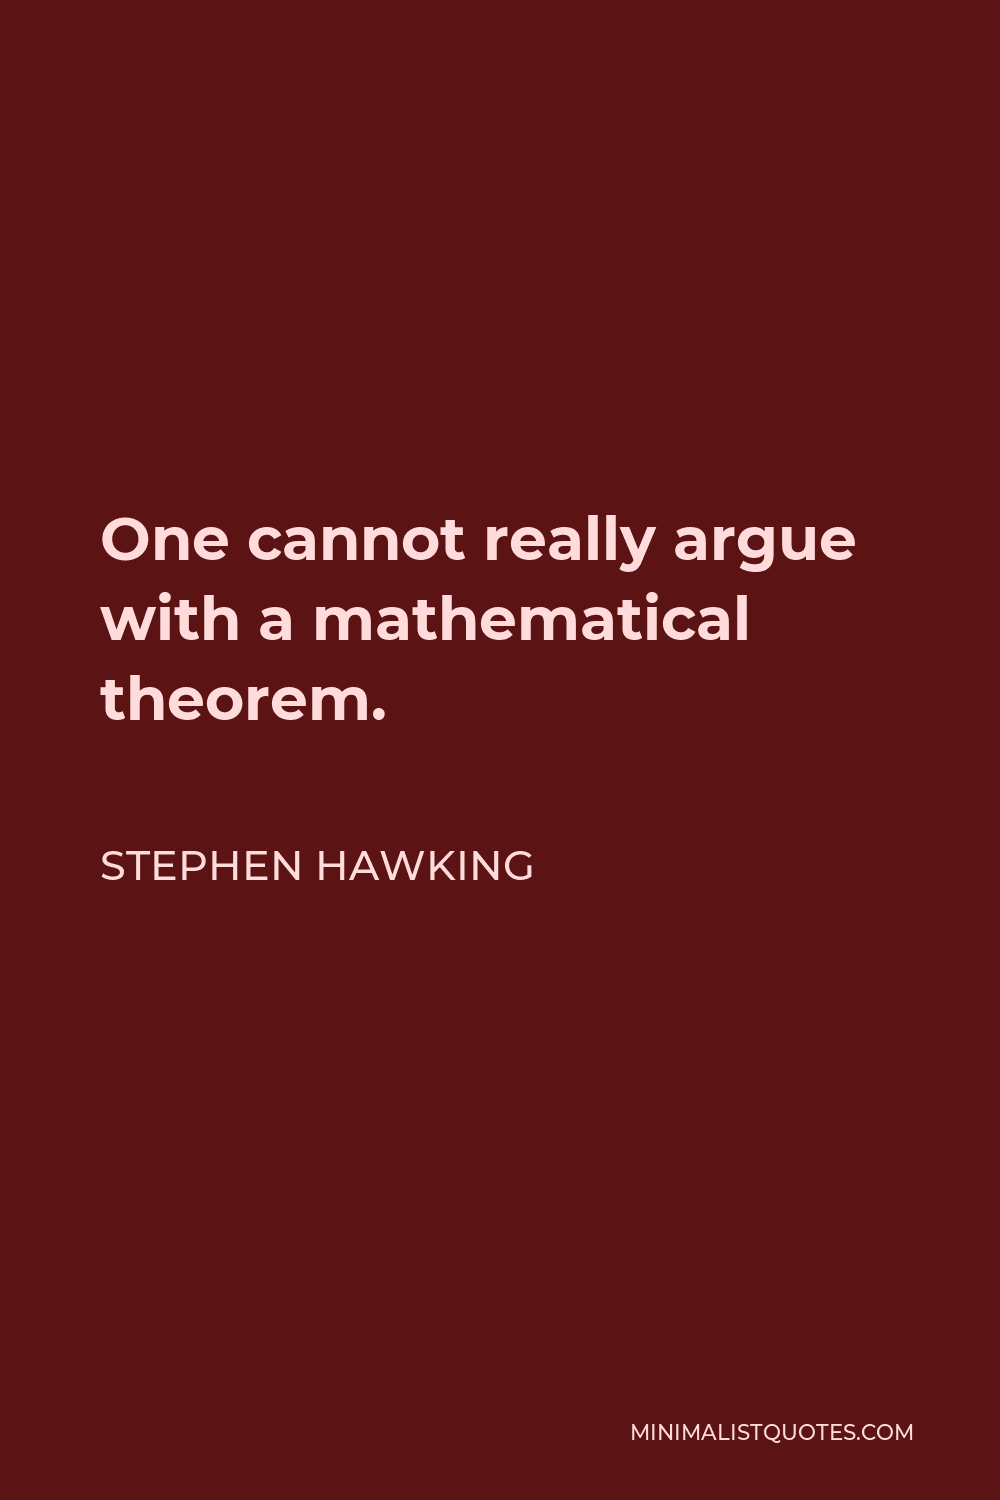 Stephen Hawking Quote - One cannot really argue with a mathematical theorem.